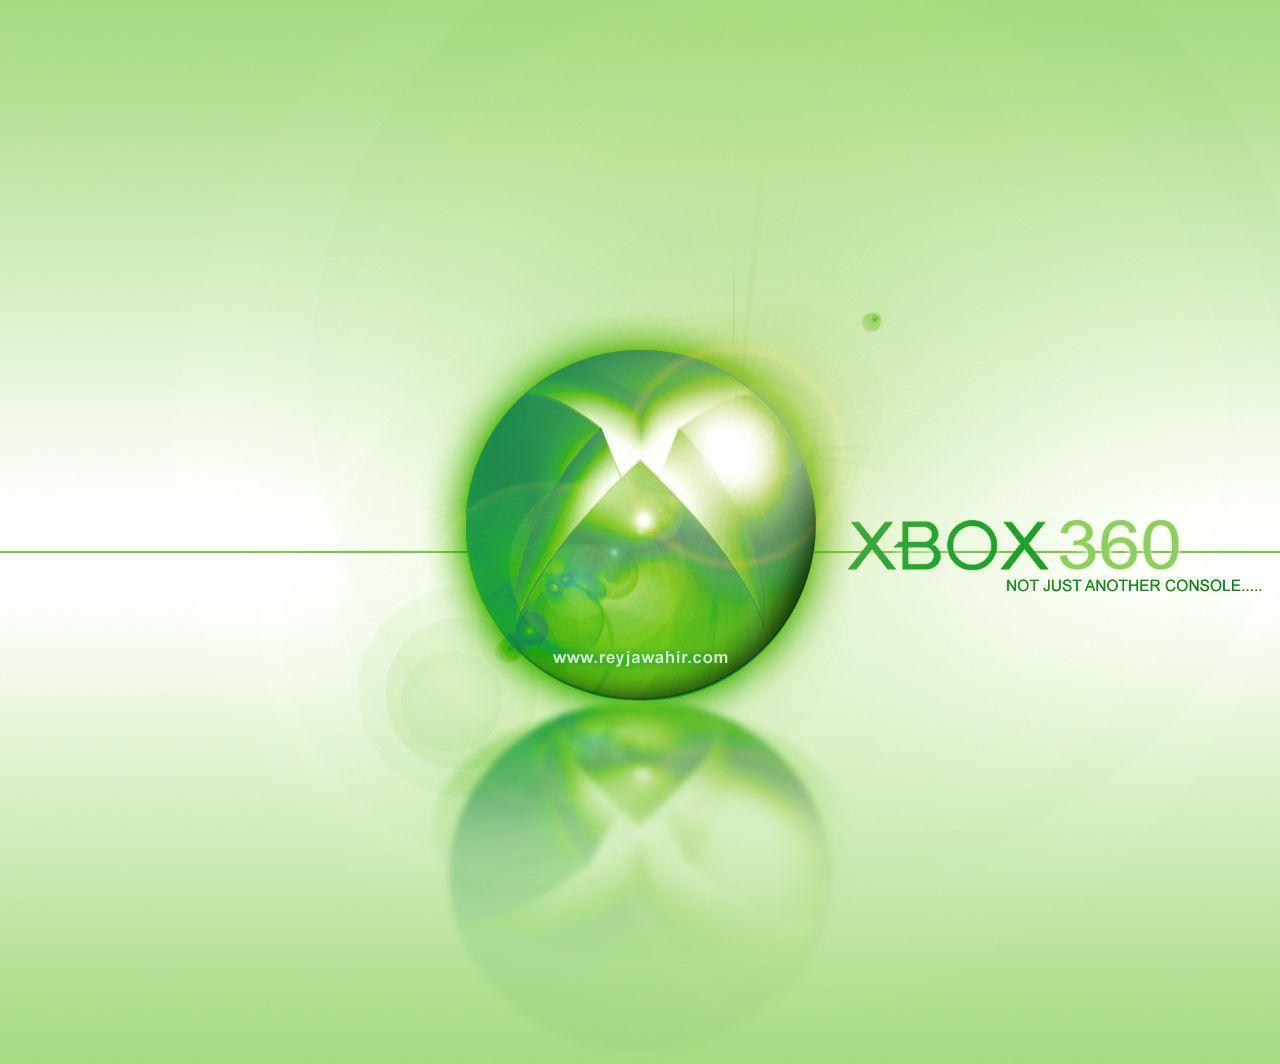 Another Xbox 360 Wallpapers by reyjdesigns